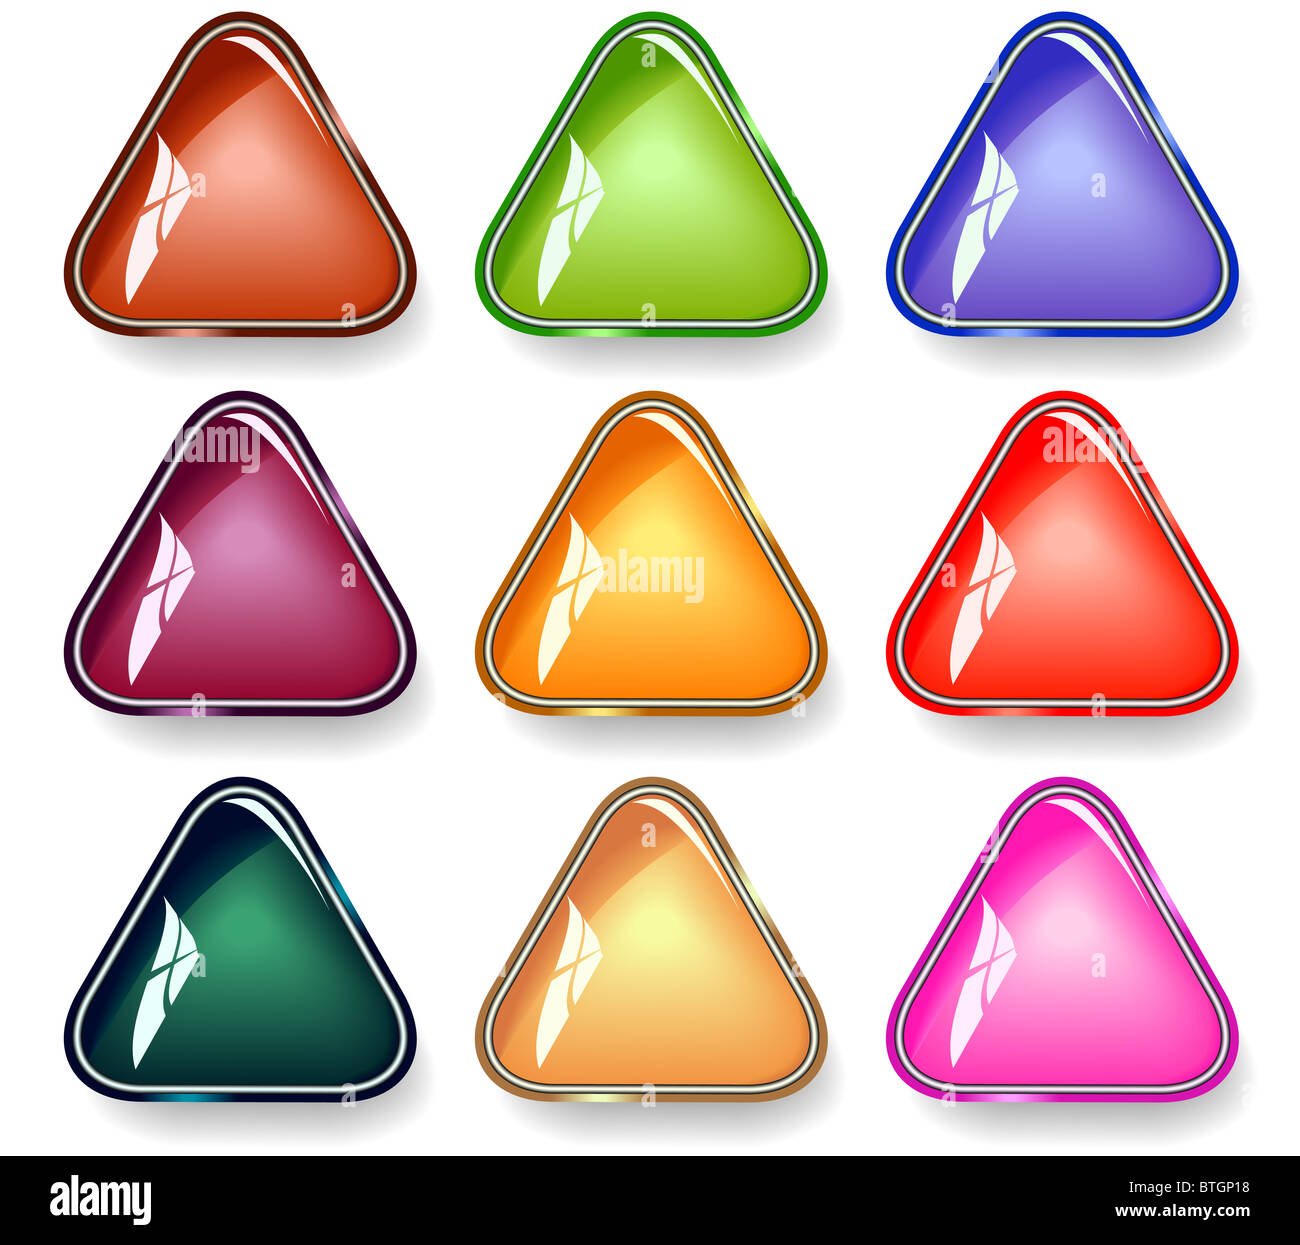 Set of illustrated triangular glossy buttons Stock Photo